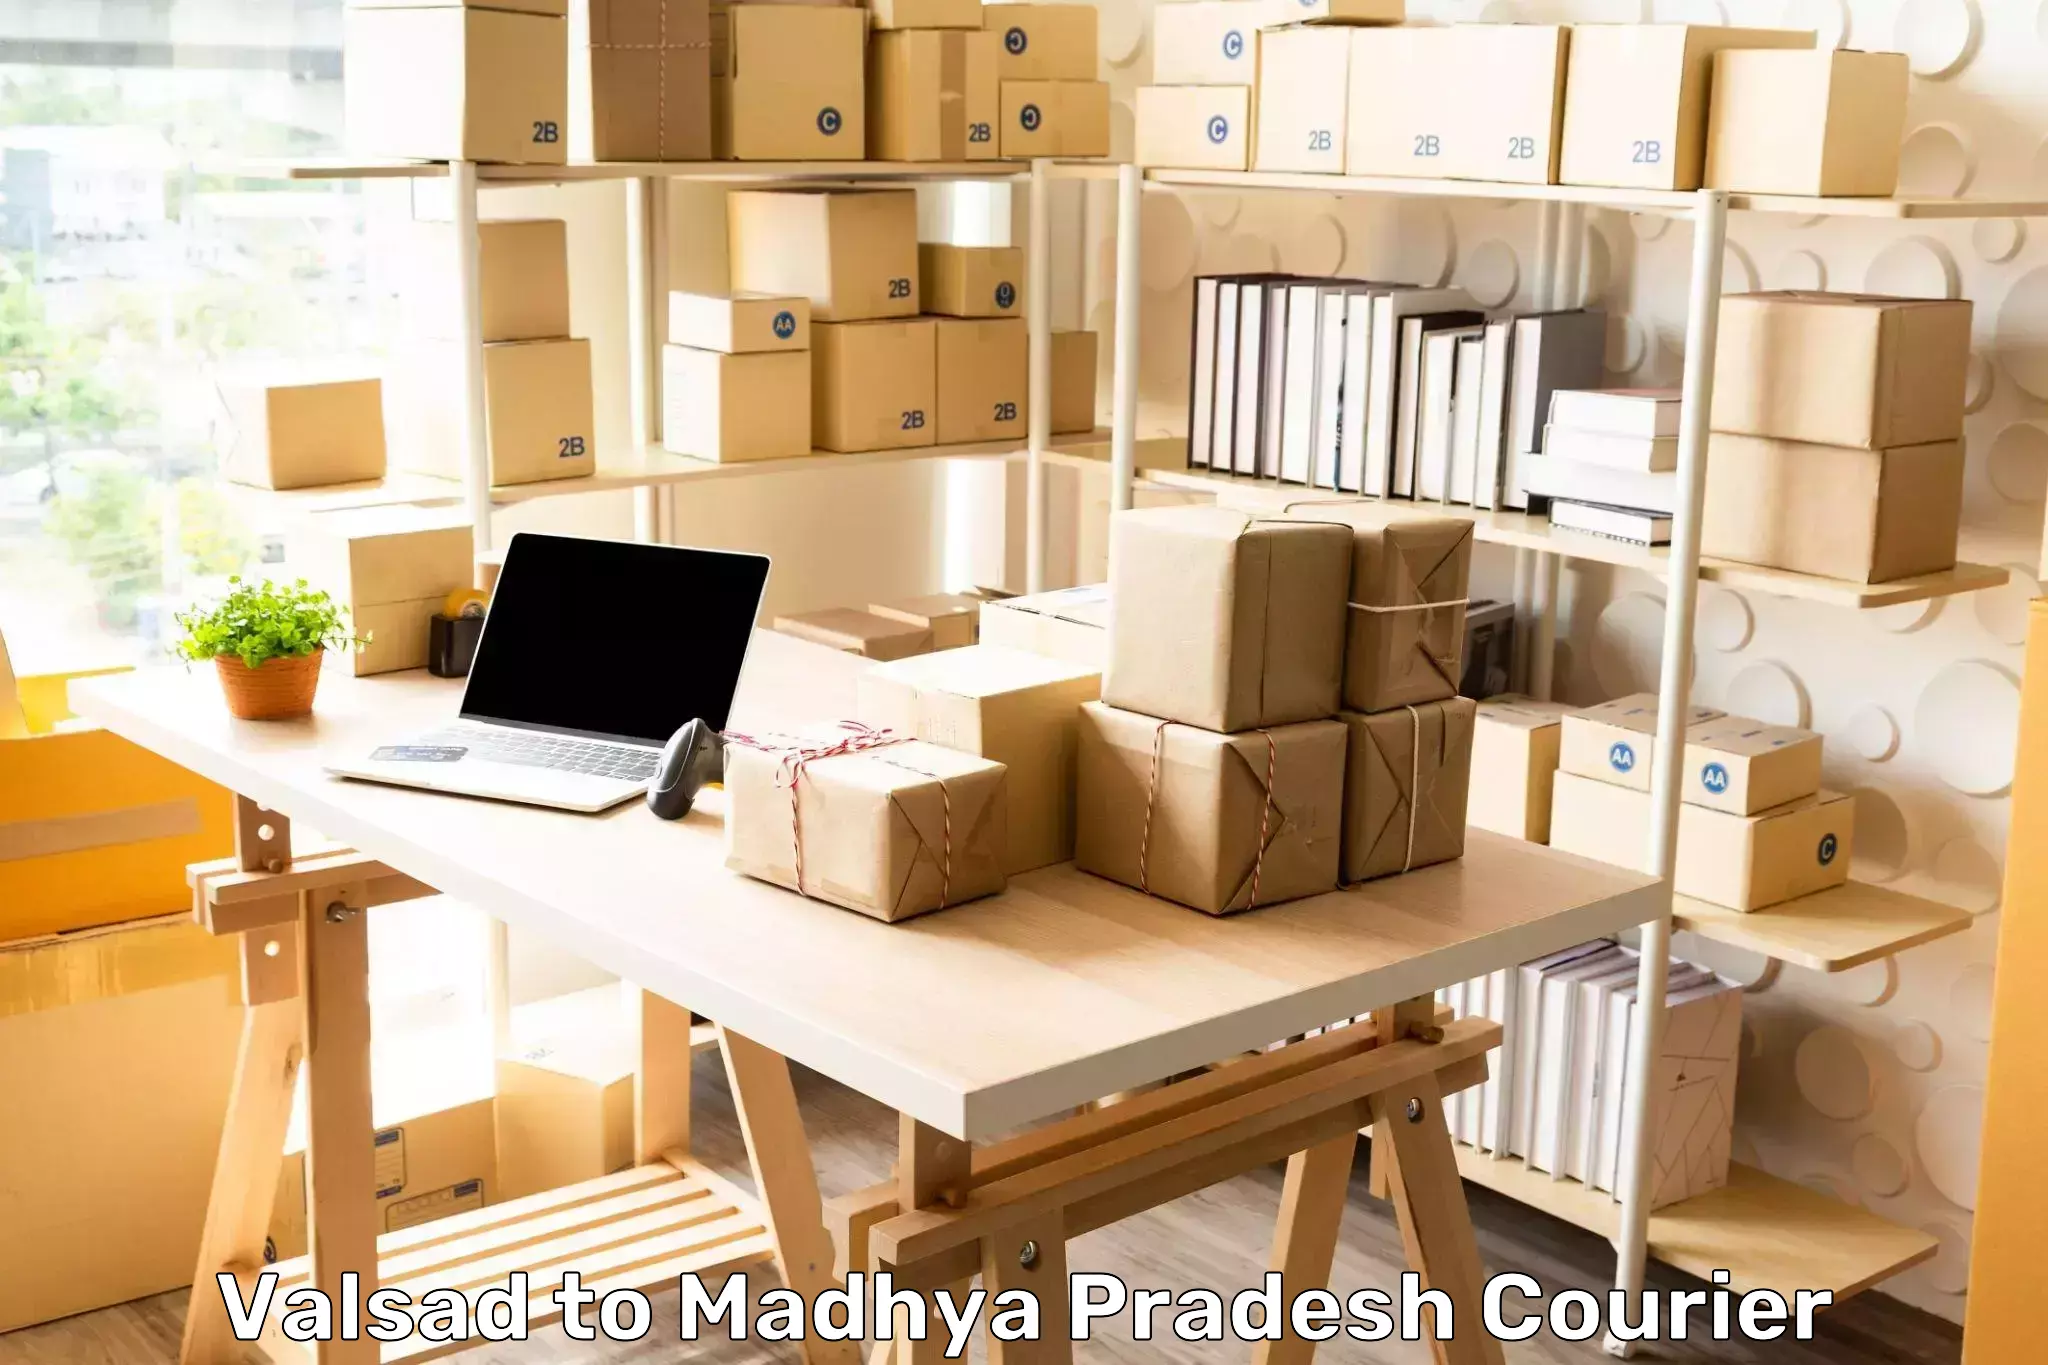 Subscription-based courier in Valsad to Athner